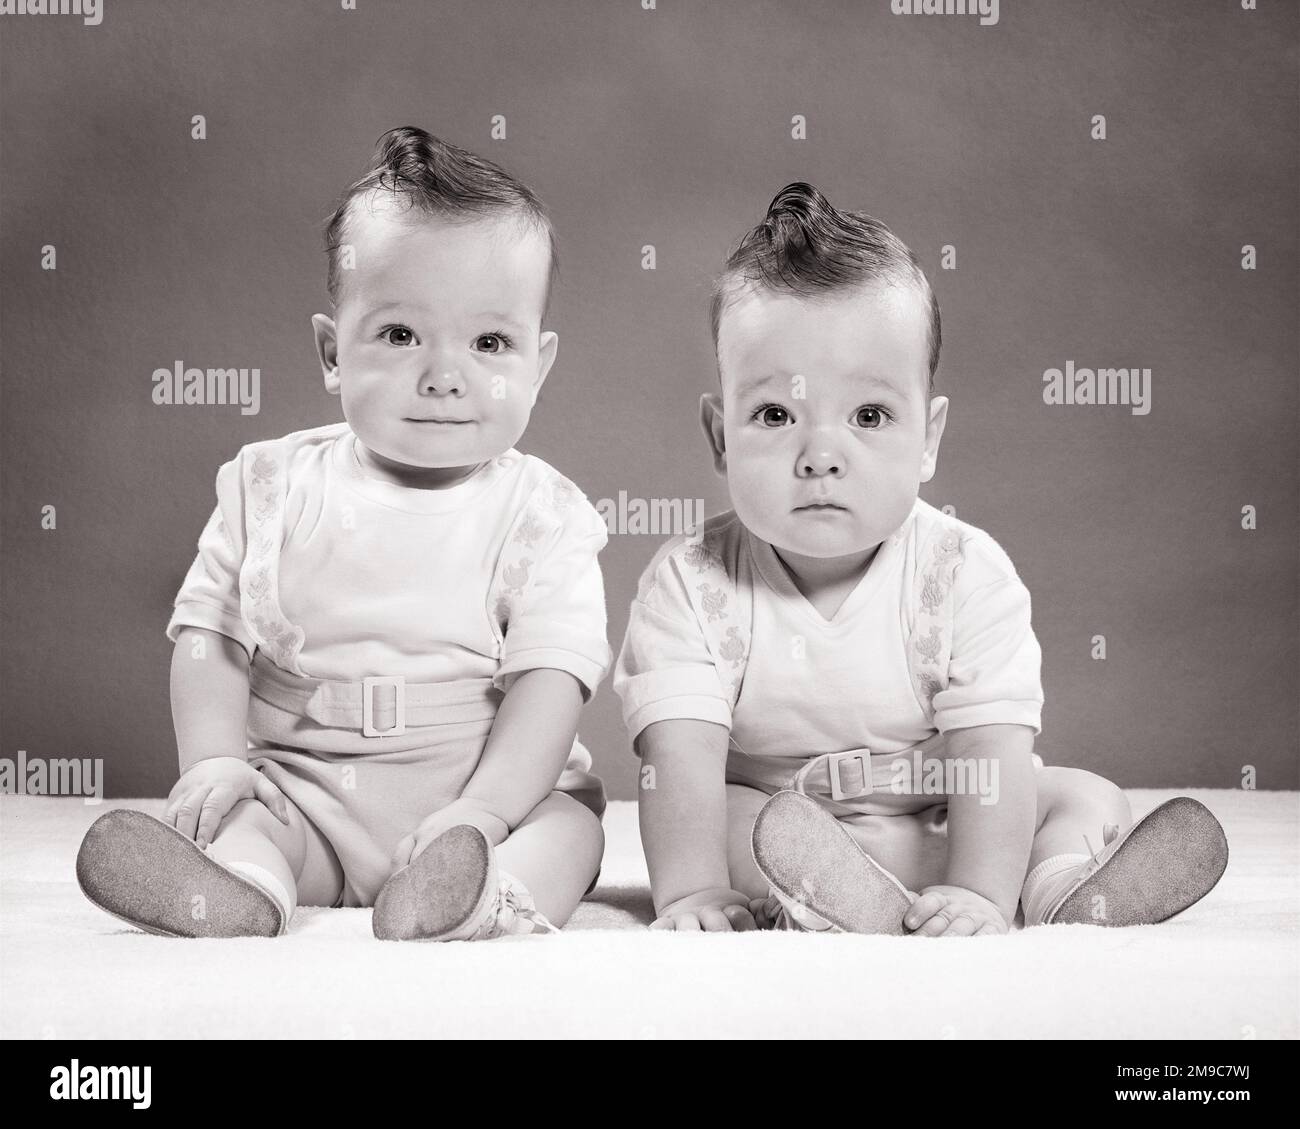 1950s TWIN BABY BOYS 9 MONTHS OLD LOOKING AT CAMERA - b5387 HAR001 HARS FULL-LENGTH MATCH MALES OPPOSITE ENTERTAINMENT EXPRESSIONS B&W MATCHING SAME HUMOROUS HAPPINESS COMICAL SIBLING BABY BOY LOOK-ALIKE COOPERATION DUPLICATE GROWTH JUVENILES LOOK ALIKE MONTHS TOGETHERNESS BIGGER BLACK AND WHITE CAUCASIAN ETHNICITY CLONE HAR001 OLD FASHIONED SMALLER Stock Photo